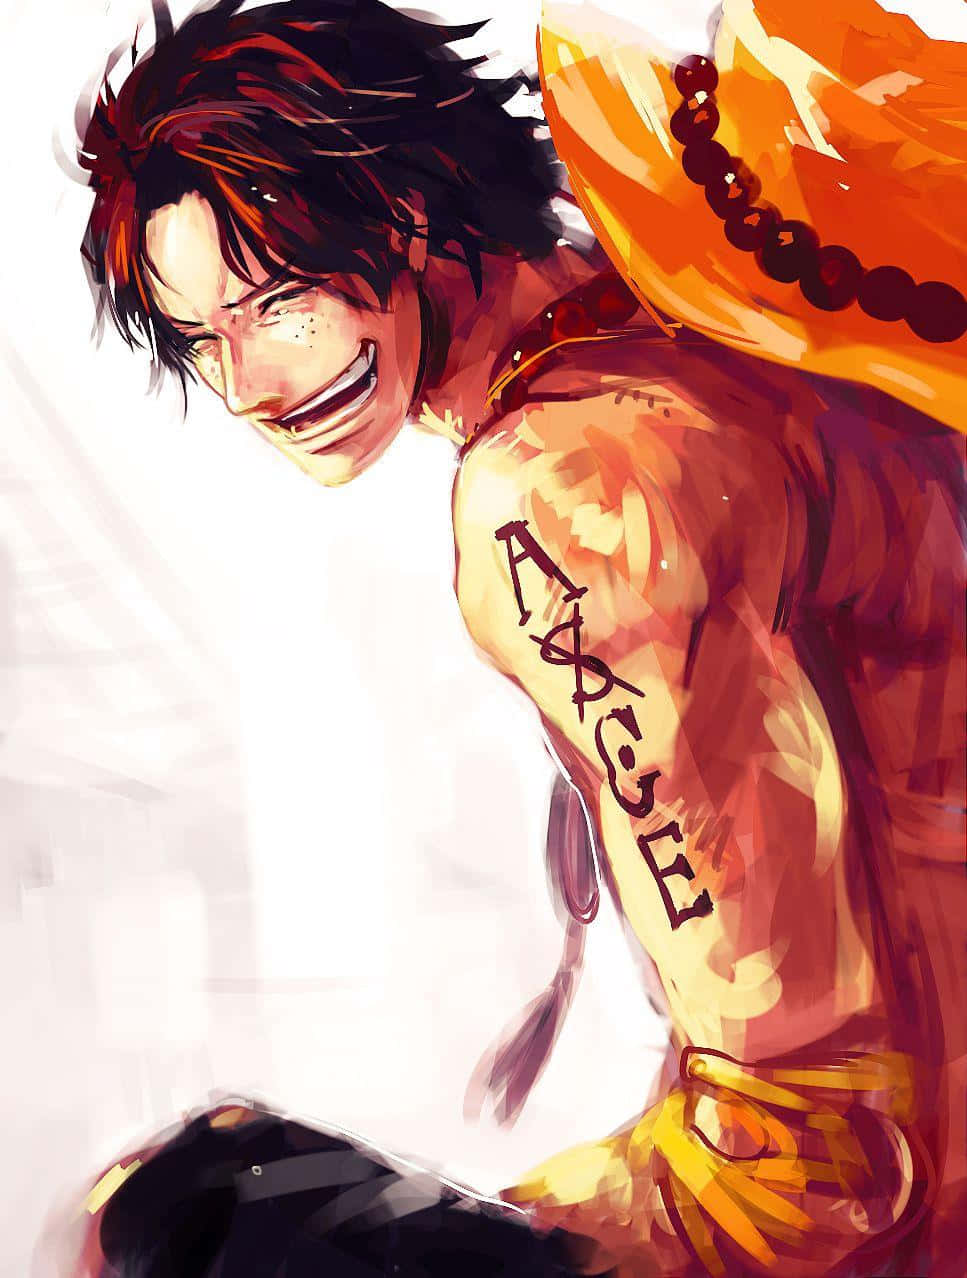 Portgas D Ace, a fictional character from the popular Anime series "One Piece." Wallpaper